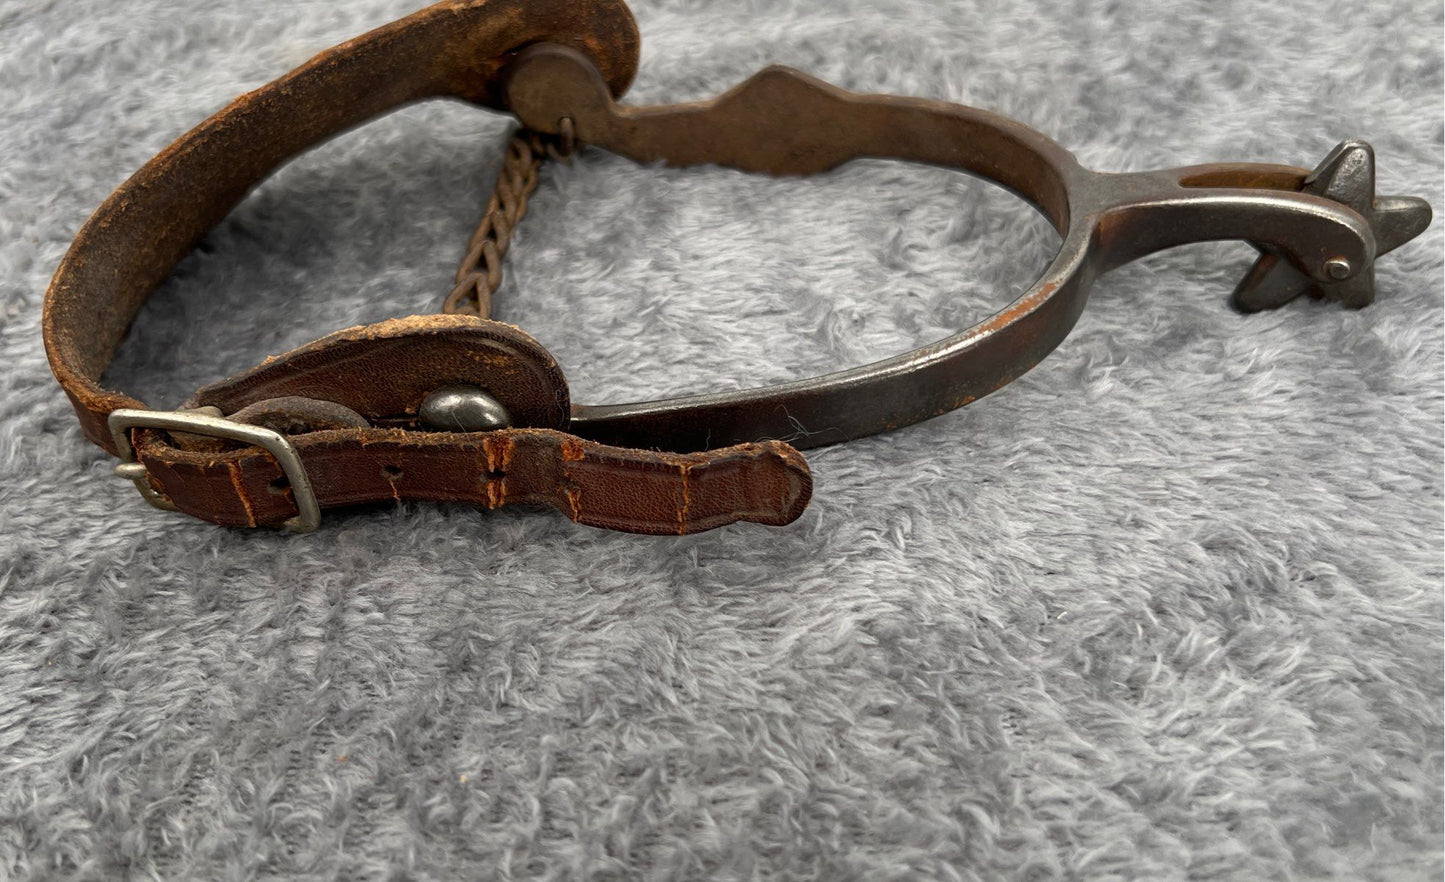 Antique Pair Of Western Spurs-Leather Straps W/ Buckles-Metal Chains-Star Spurs